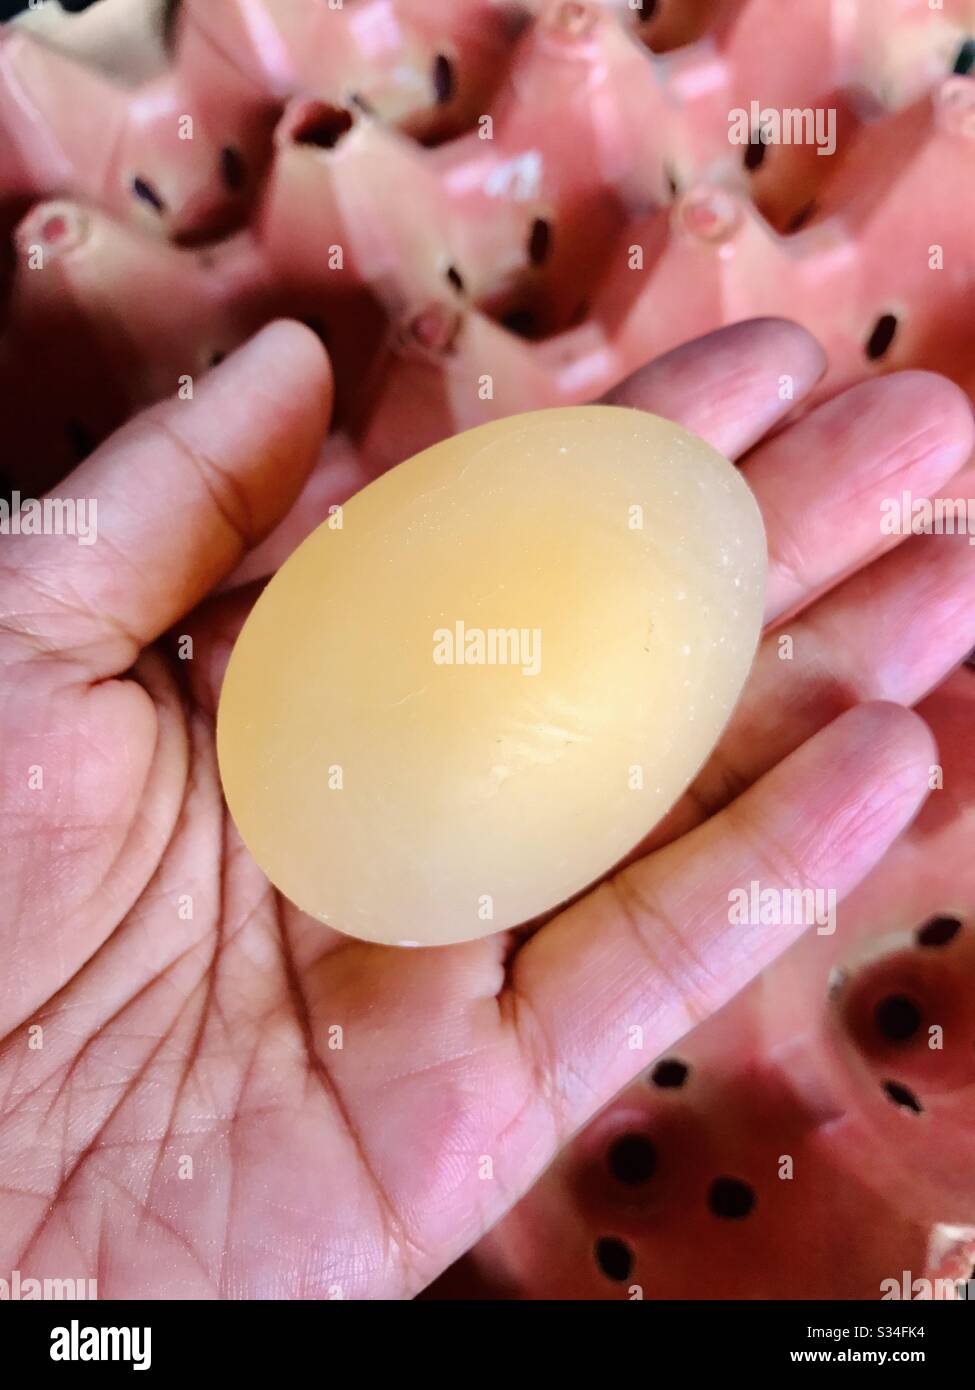 An eggs without a shell. Laid prematurely by chickens that are shocked or grabbed by surprise. It also happens when chickens lack calcium. Egg white and yolk have the same texture and flavor. Stock Photo